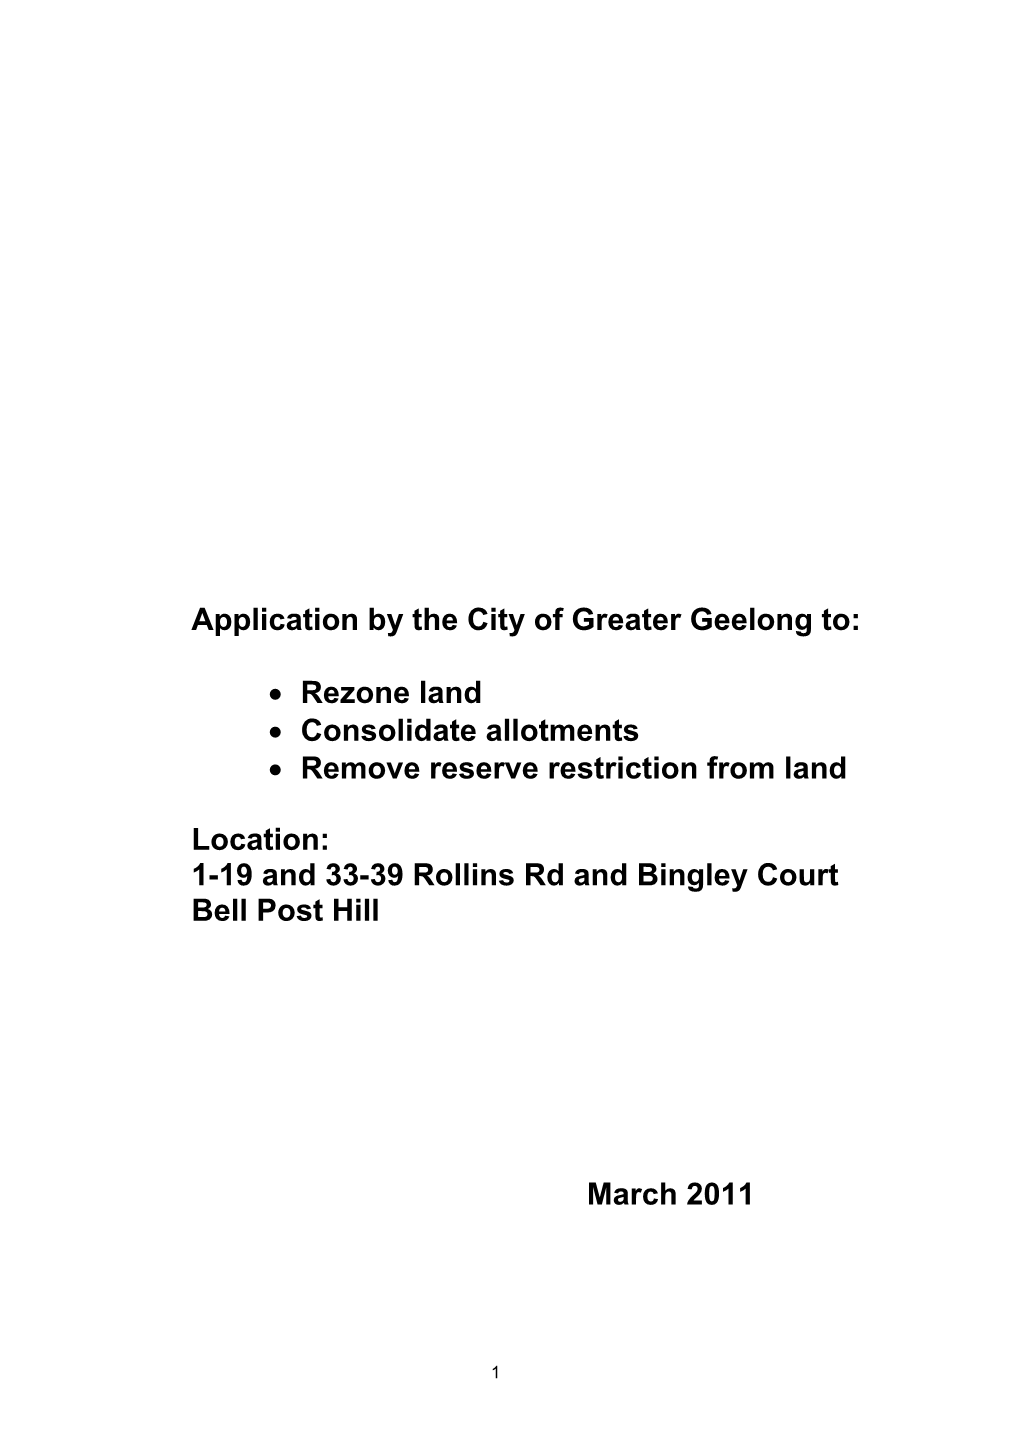 Application by the City of Greater Geelong To